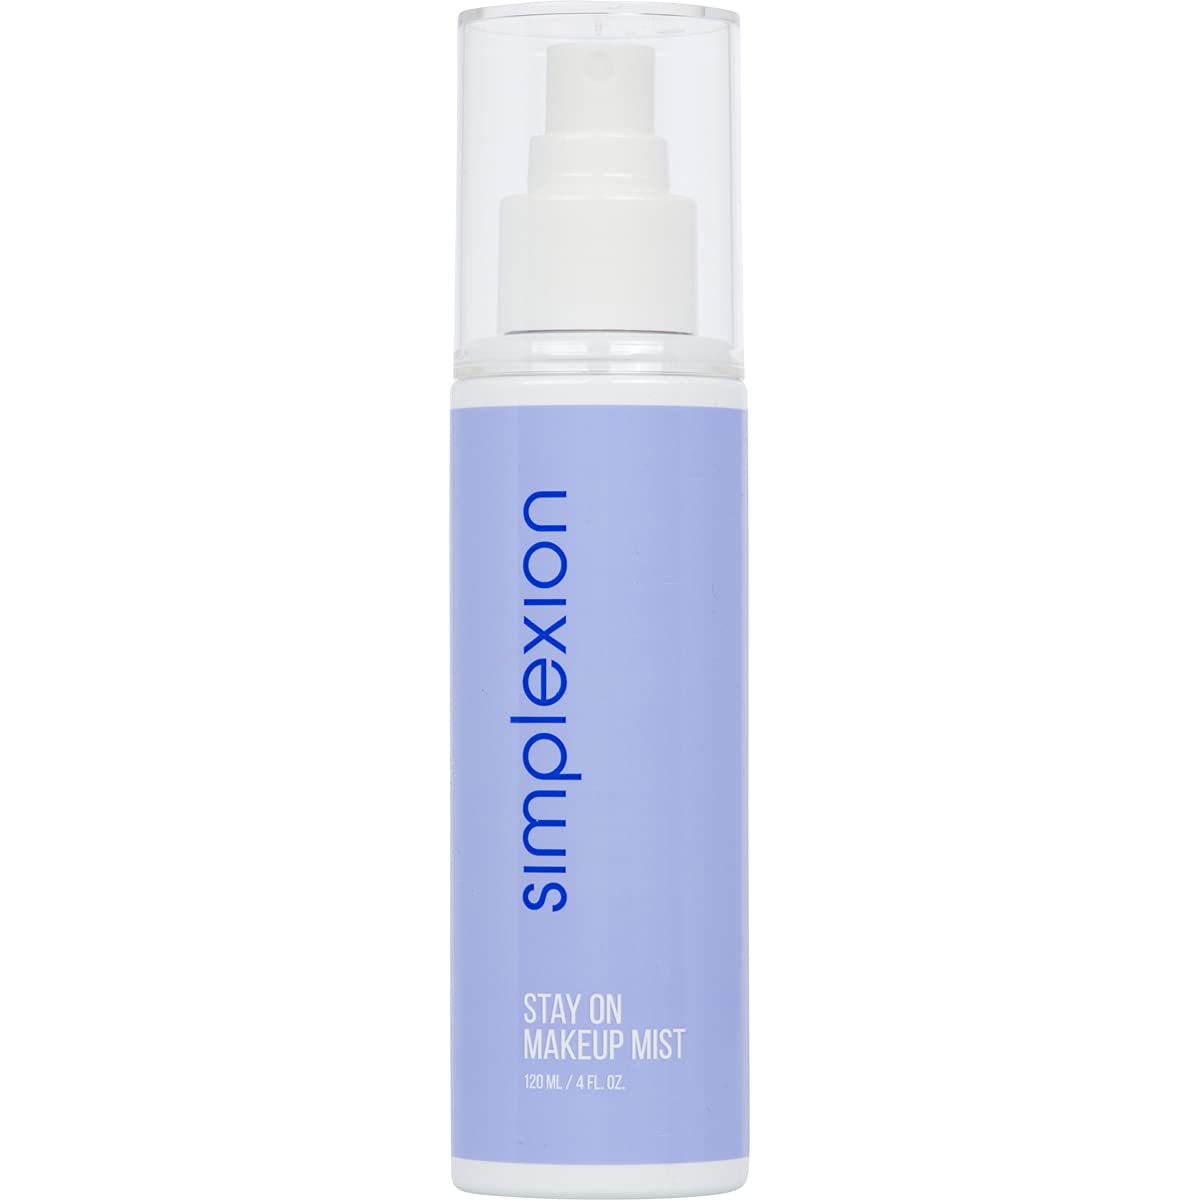 Simplexion Stay On Makeup Mist - Long Lasting, [...]